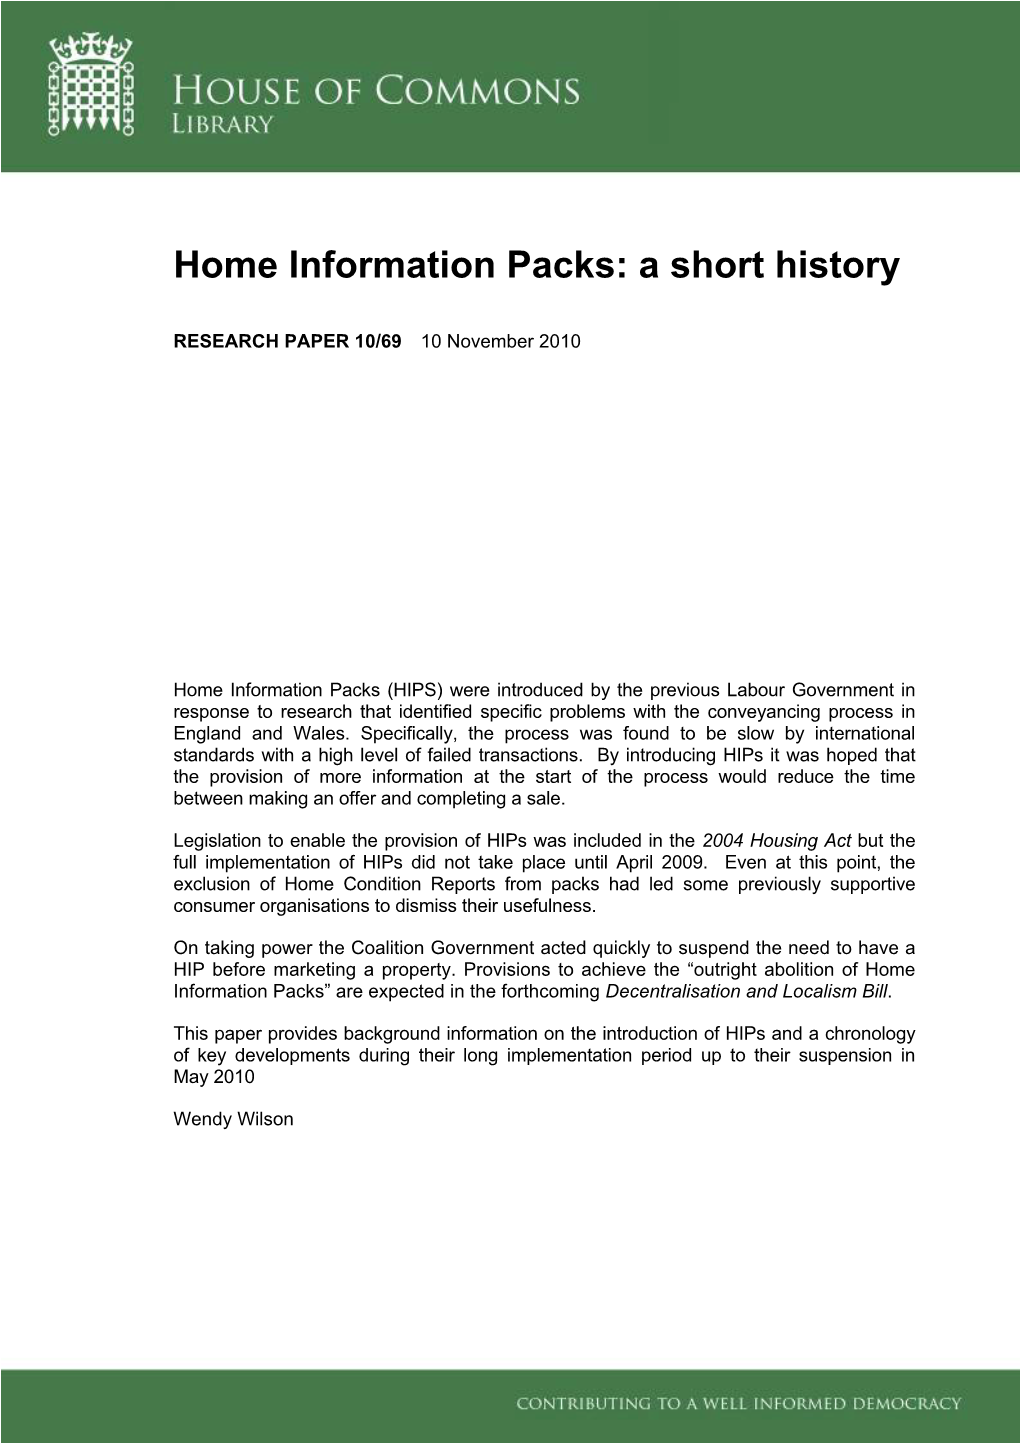 Home Information Packs: a Short History